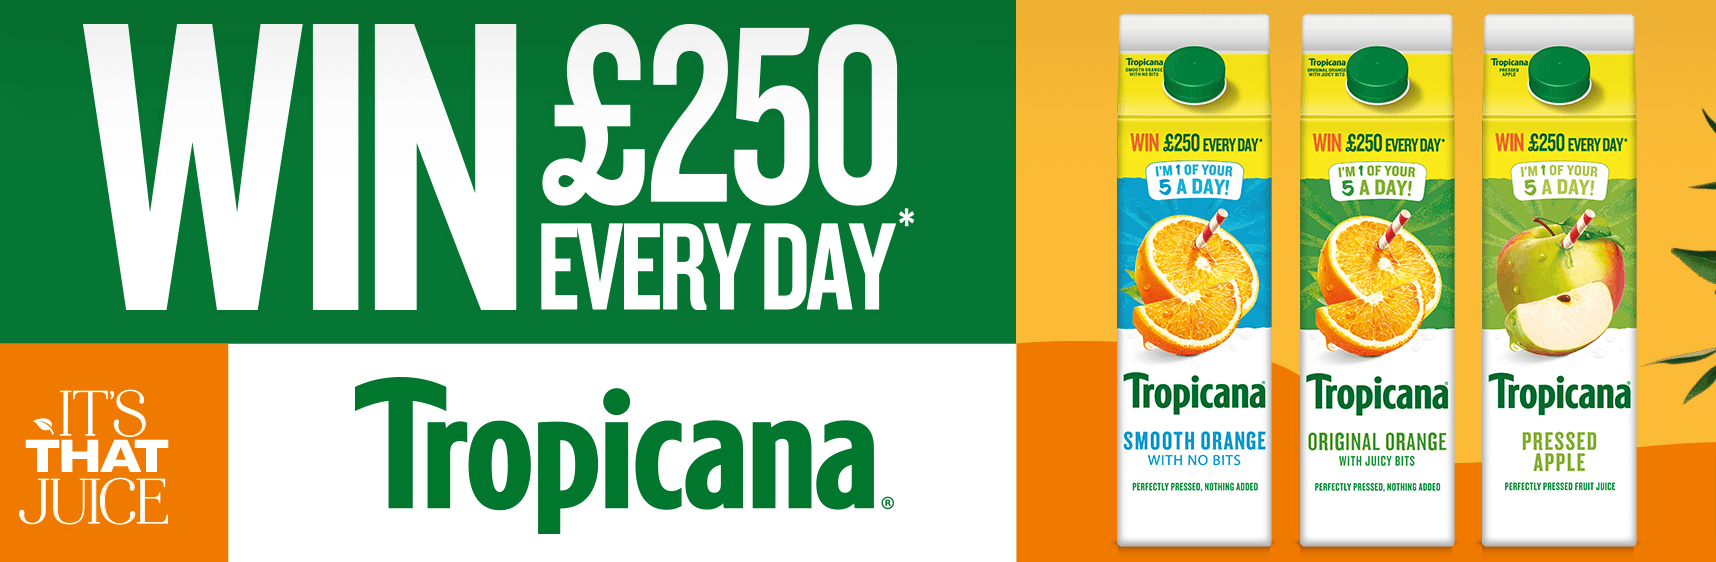 Win £250 cash every day with Tropicana